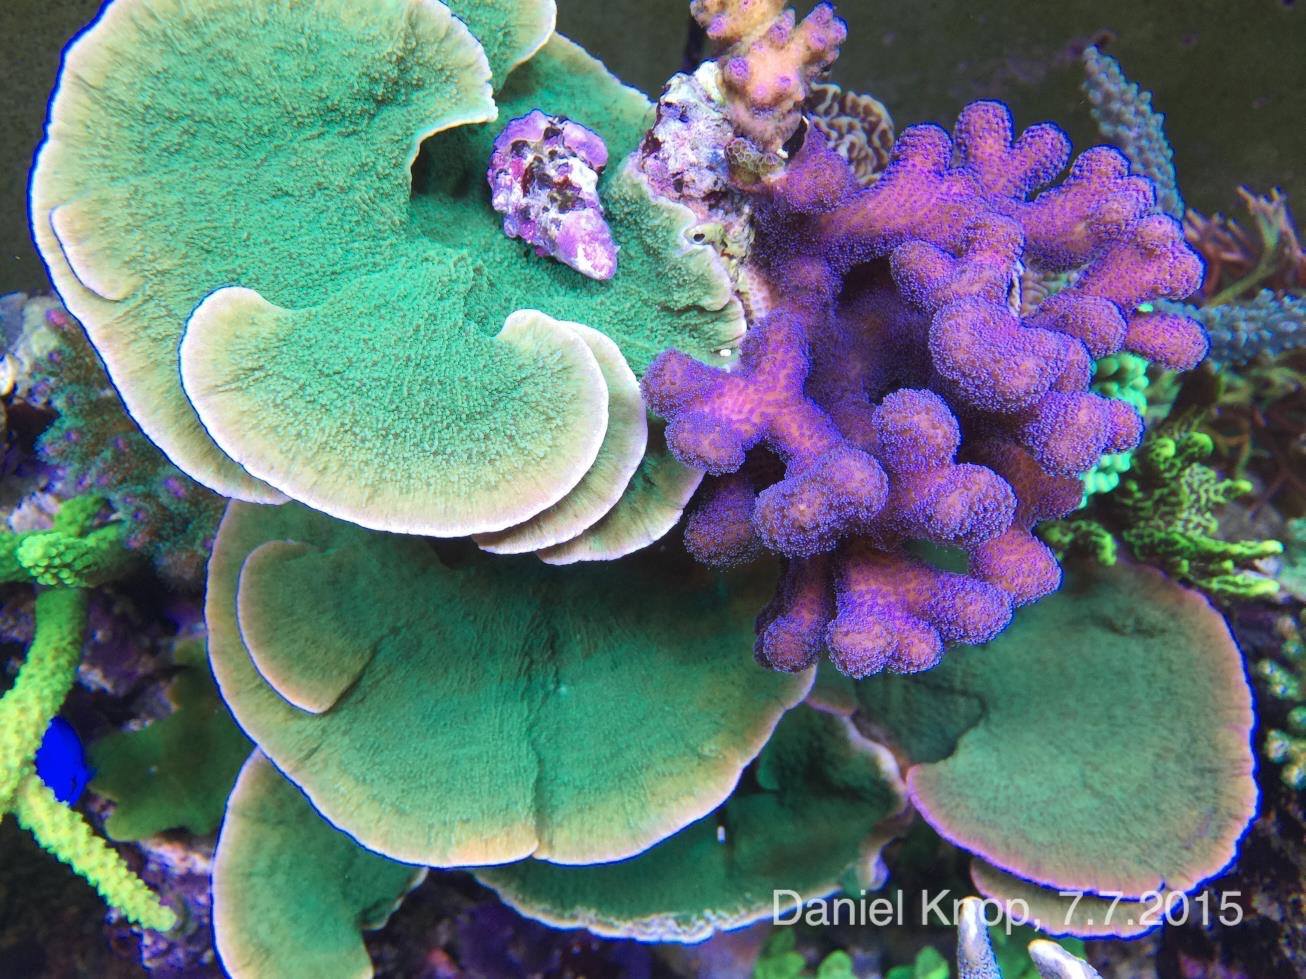 A purple Stylophora is extremely well framed by the contrasting coloration and shape of green Montipora capricornis.